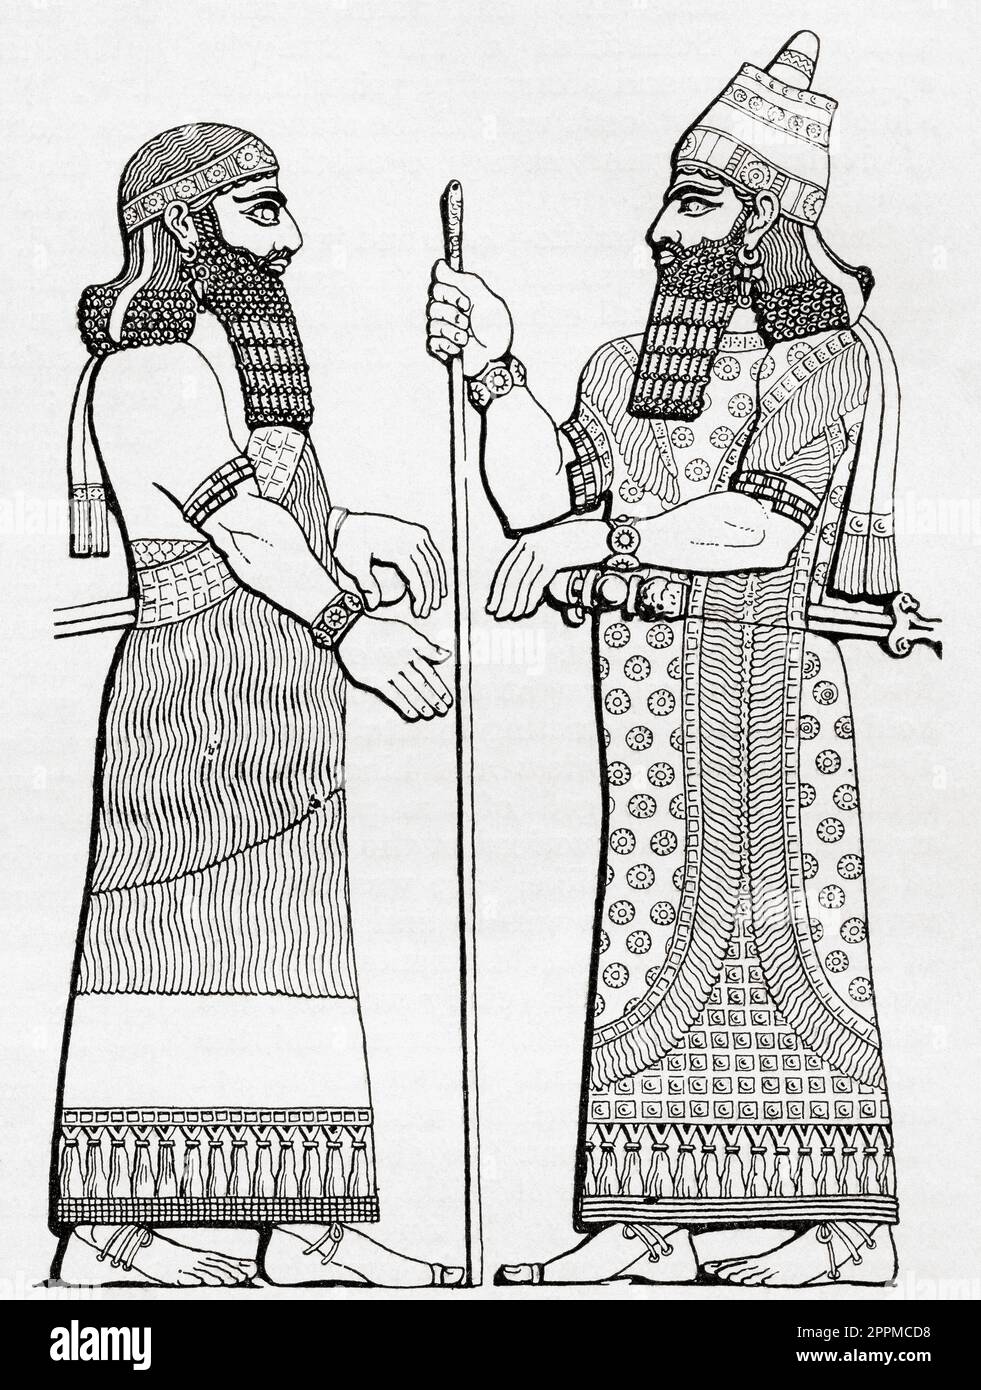 An Assyrian king and his chief minister.  From the book Outline of History by H.G. Wells, published 1920. Stock Photo